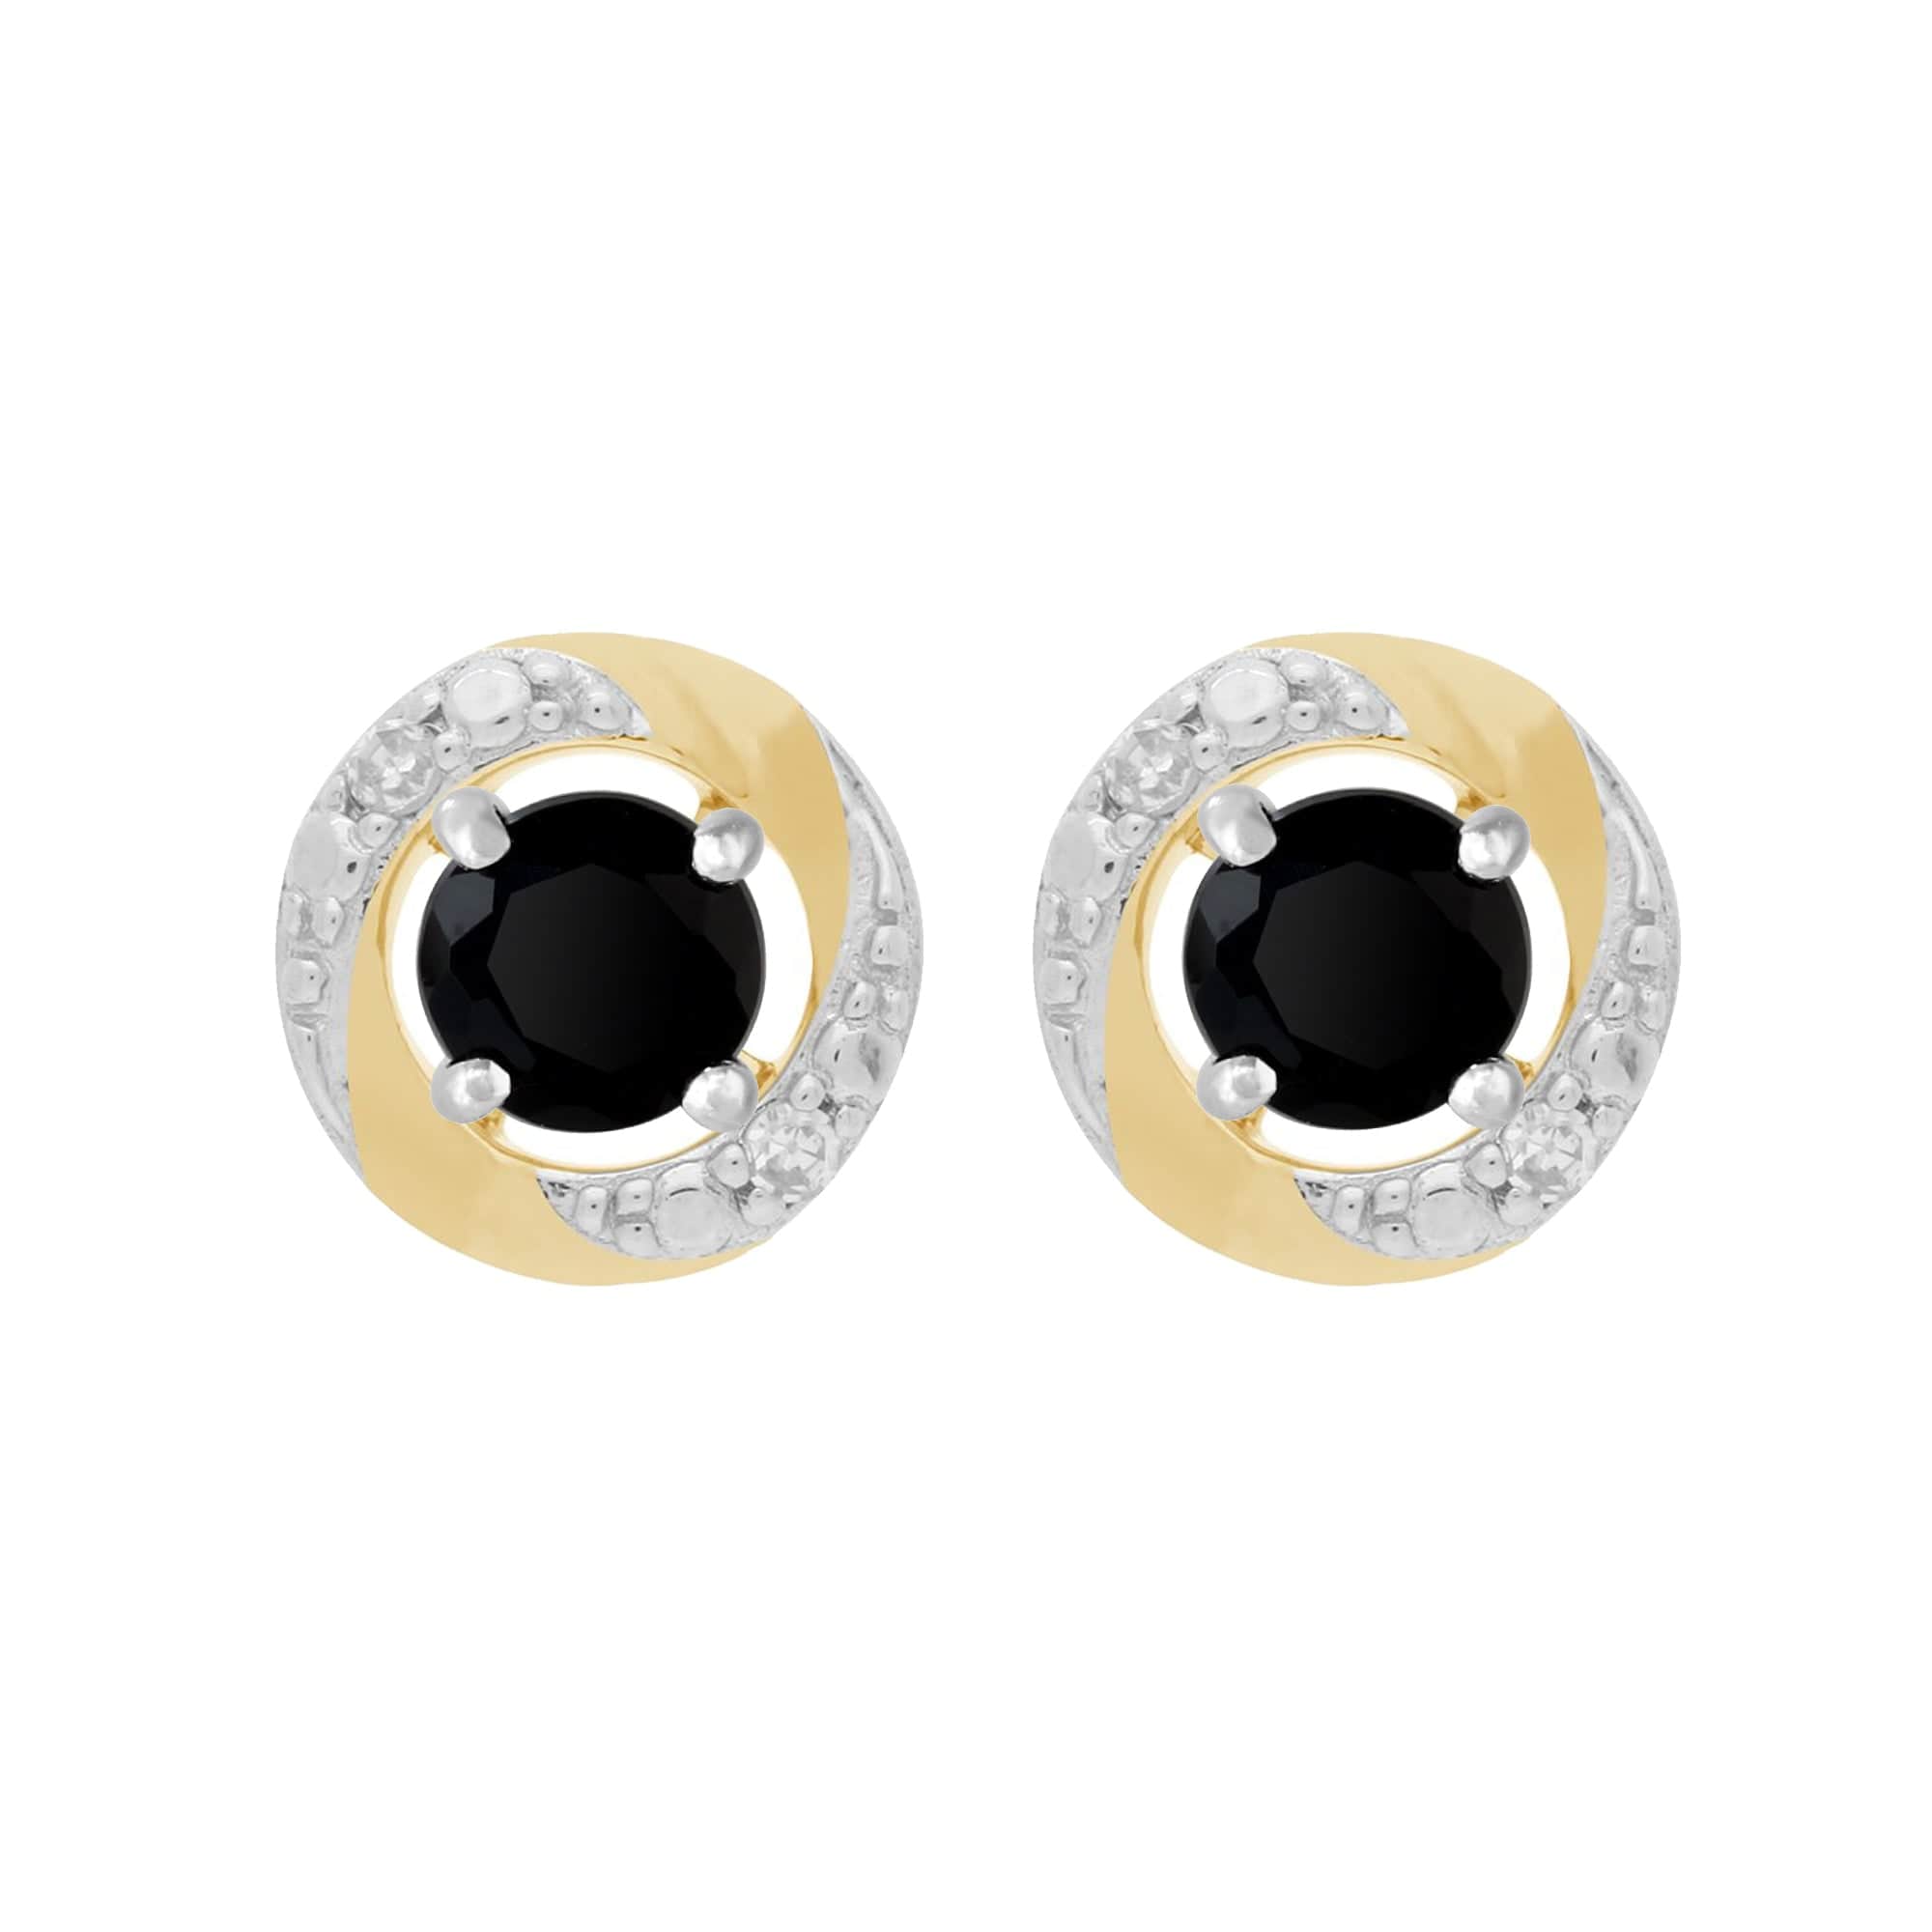 117E0031119-191E0374019 9ct White Gold Black Onyx Stud Earrings with Detachable Diamond Halo Ear Jacket in 9ct Yellow Gold 1